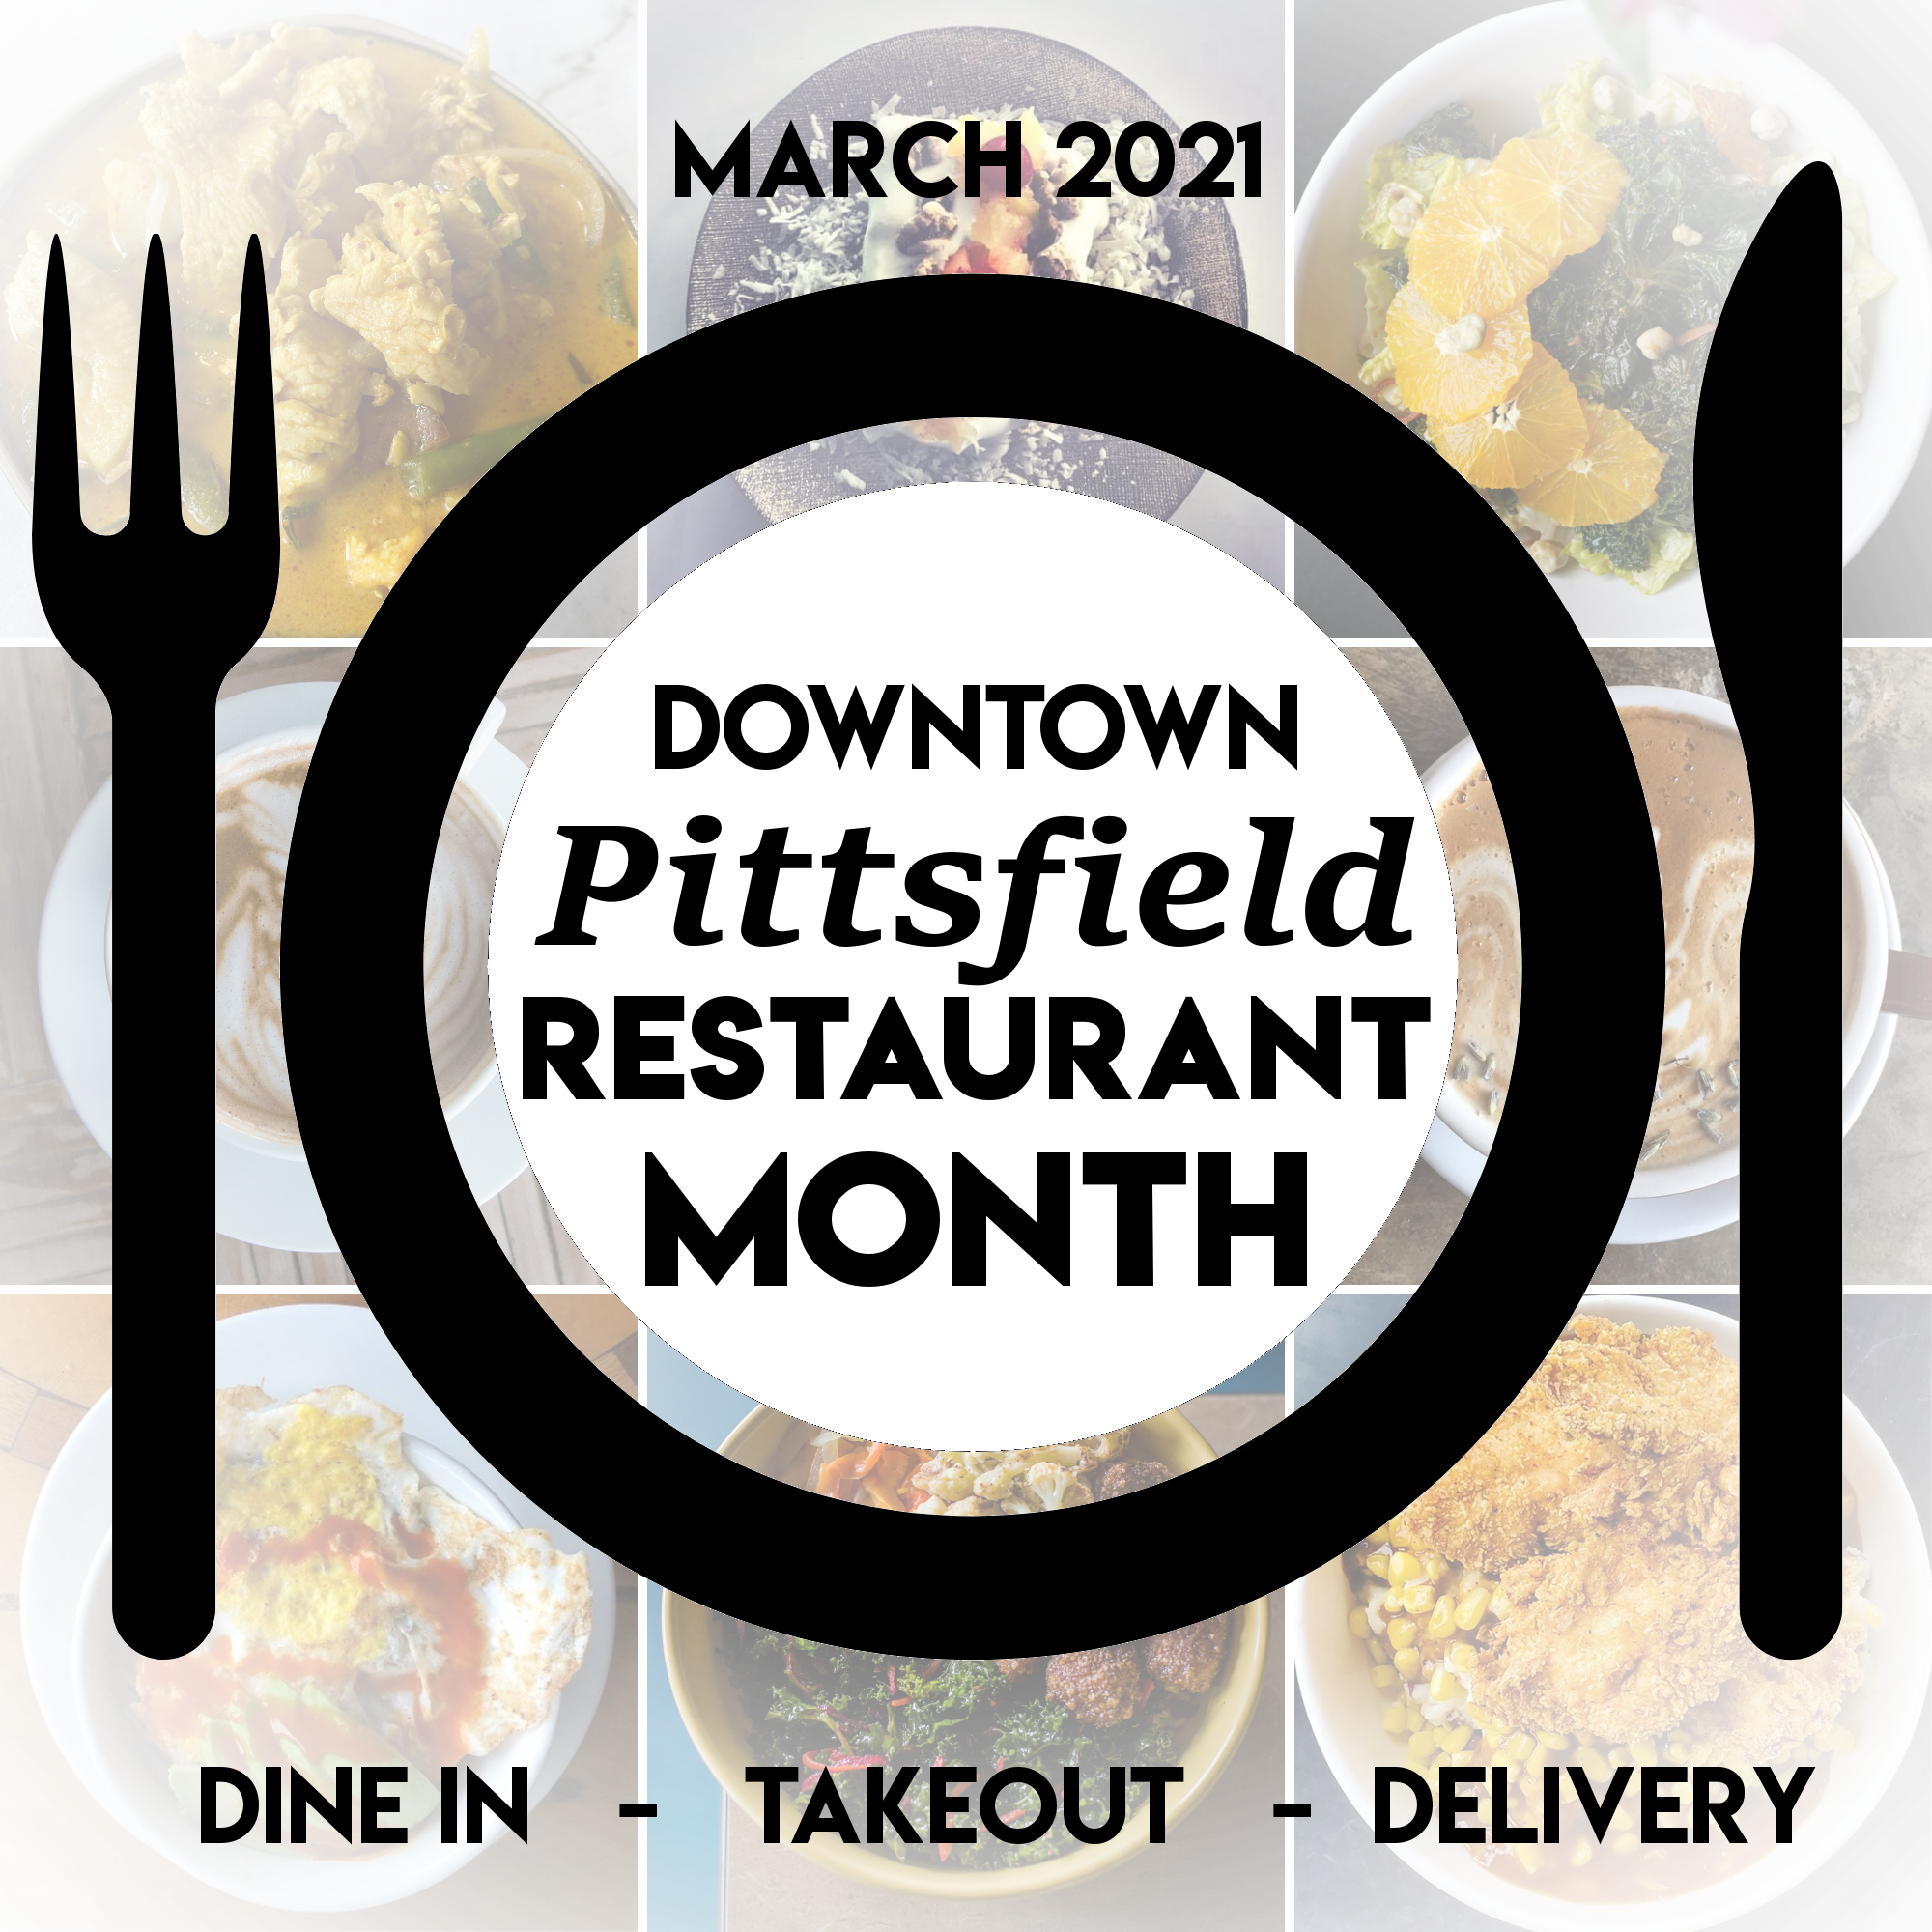 Downtown Pittsfield Restaurant Month